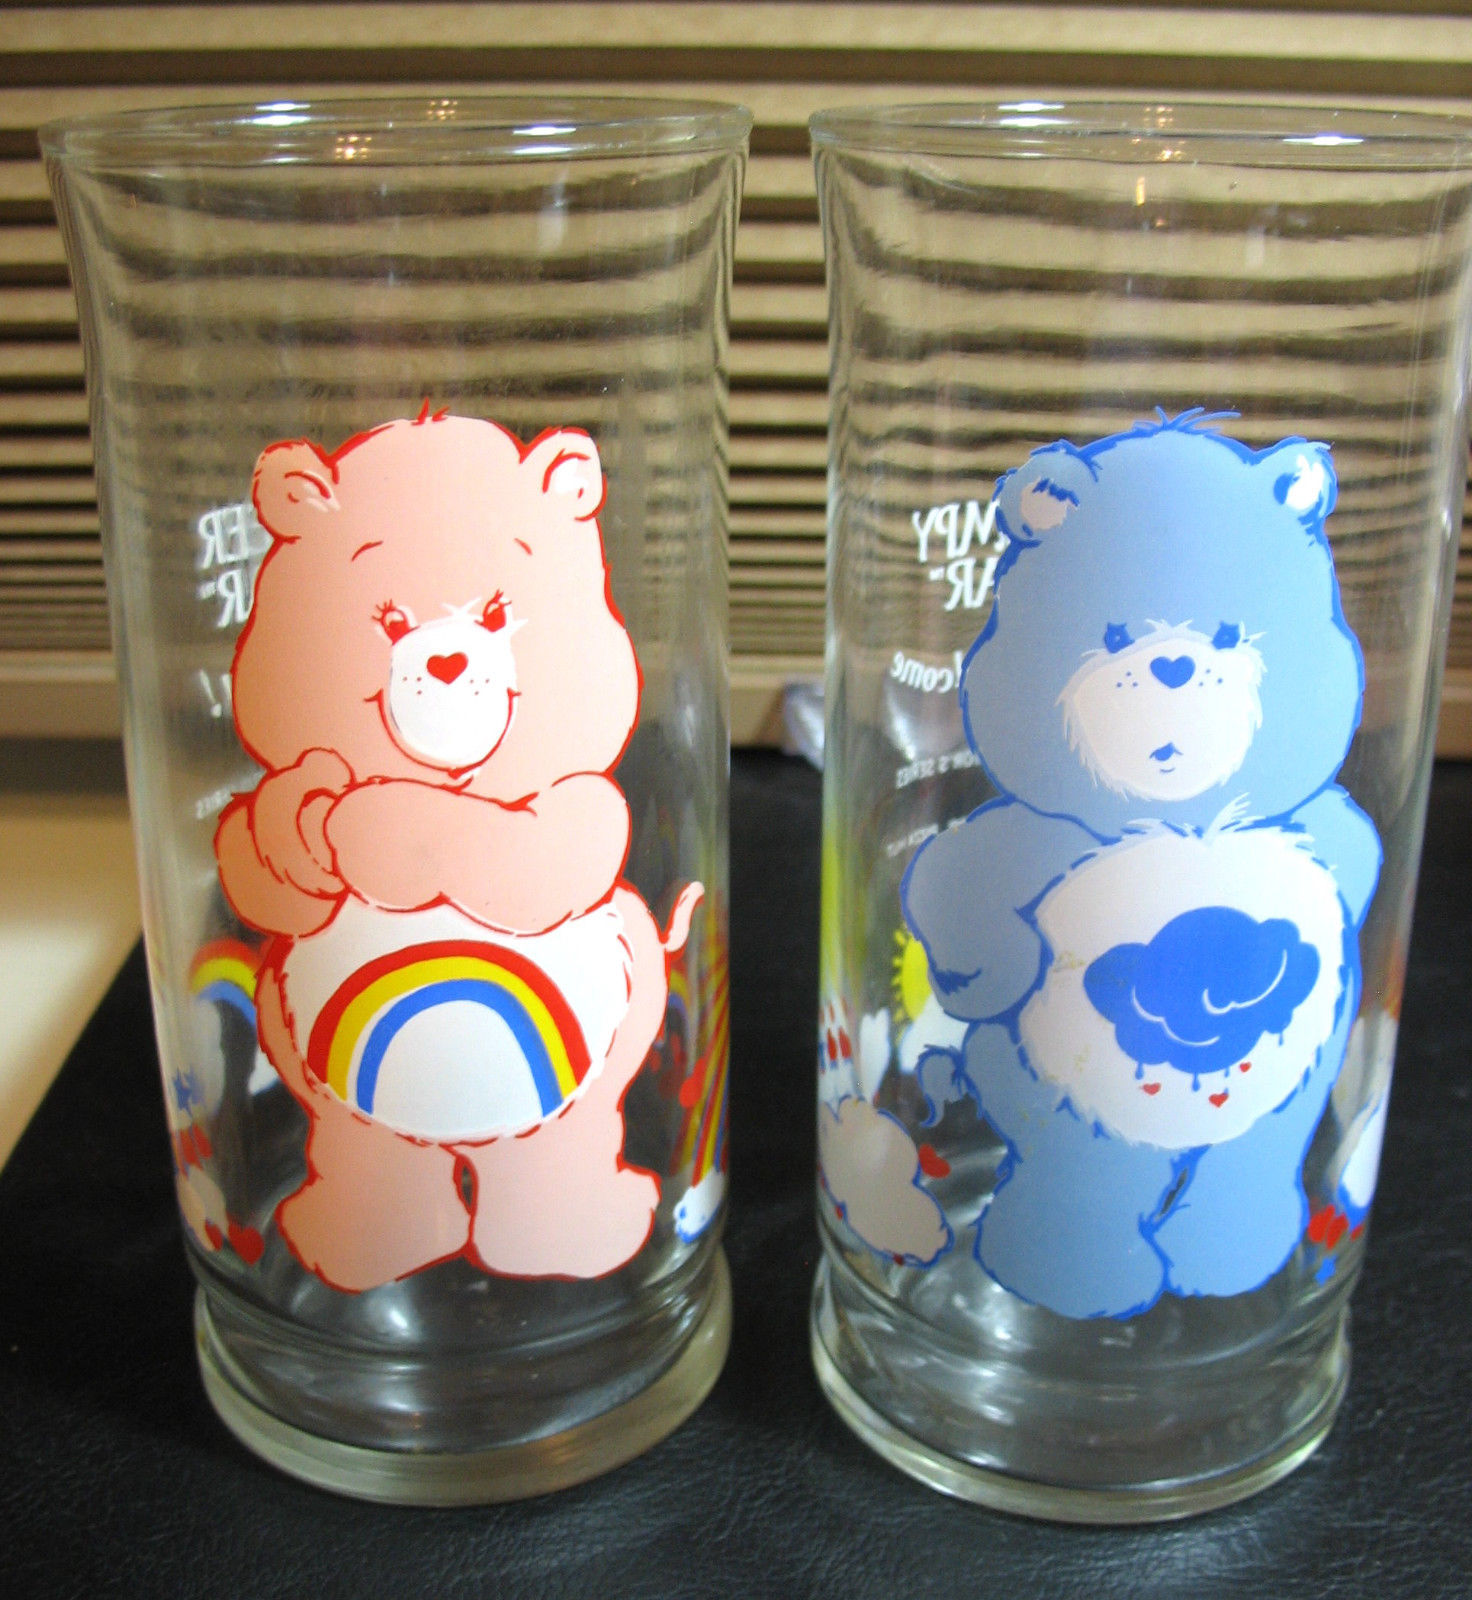 Set of 2 Care Bear Glasses Tumblers 1983 Libby Glass Co Pizza Hut Cheer & Grumpy